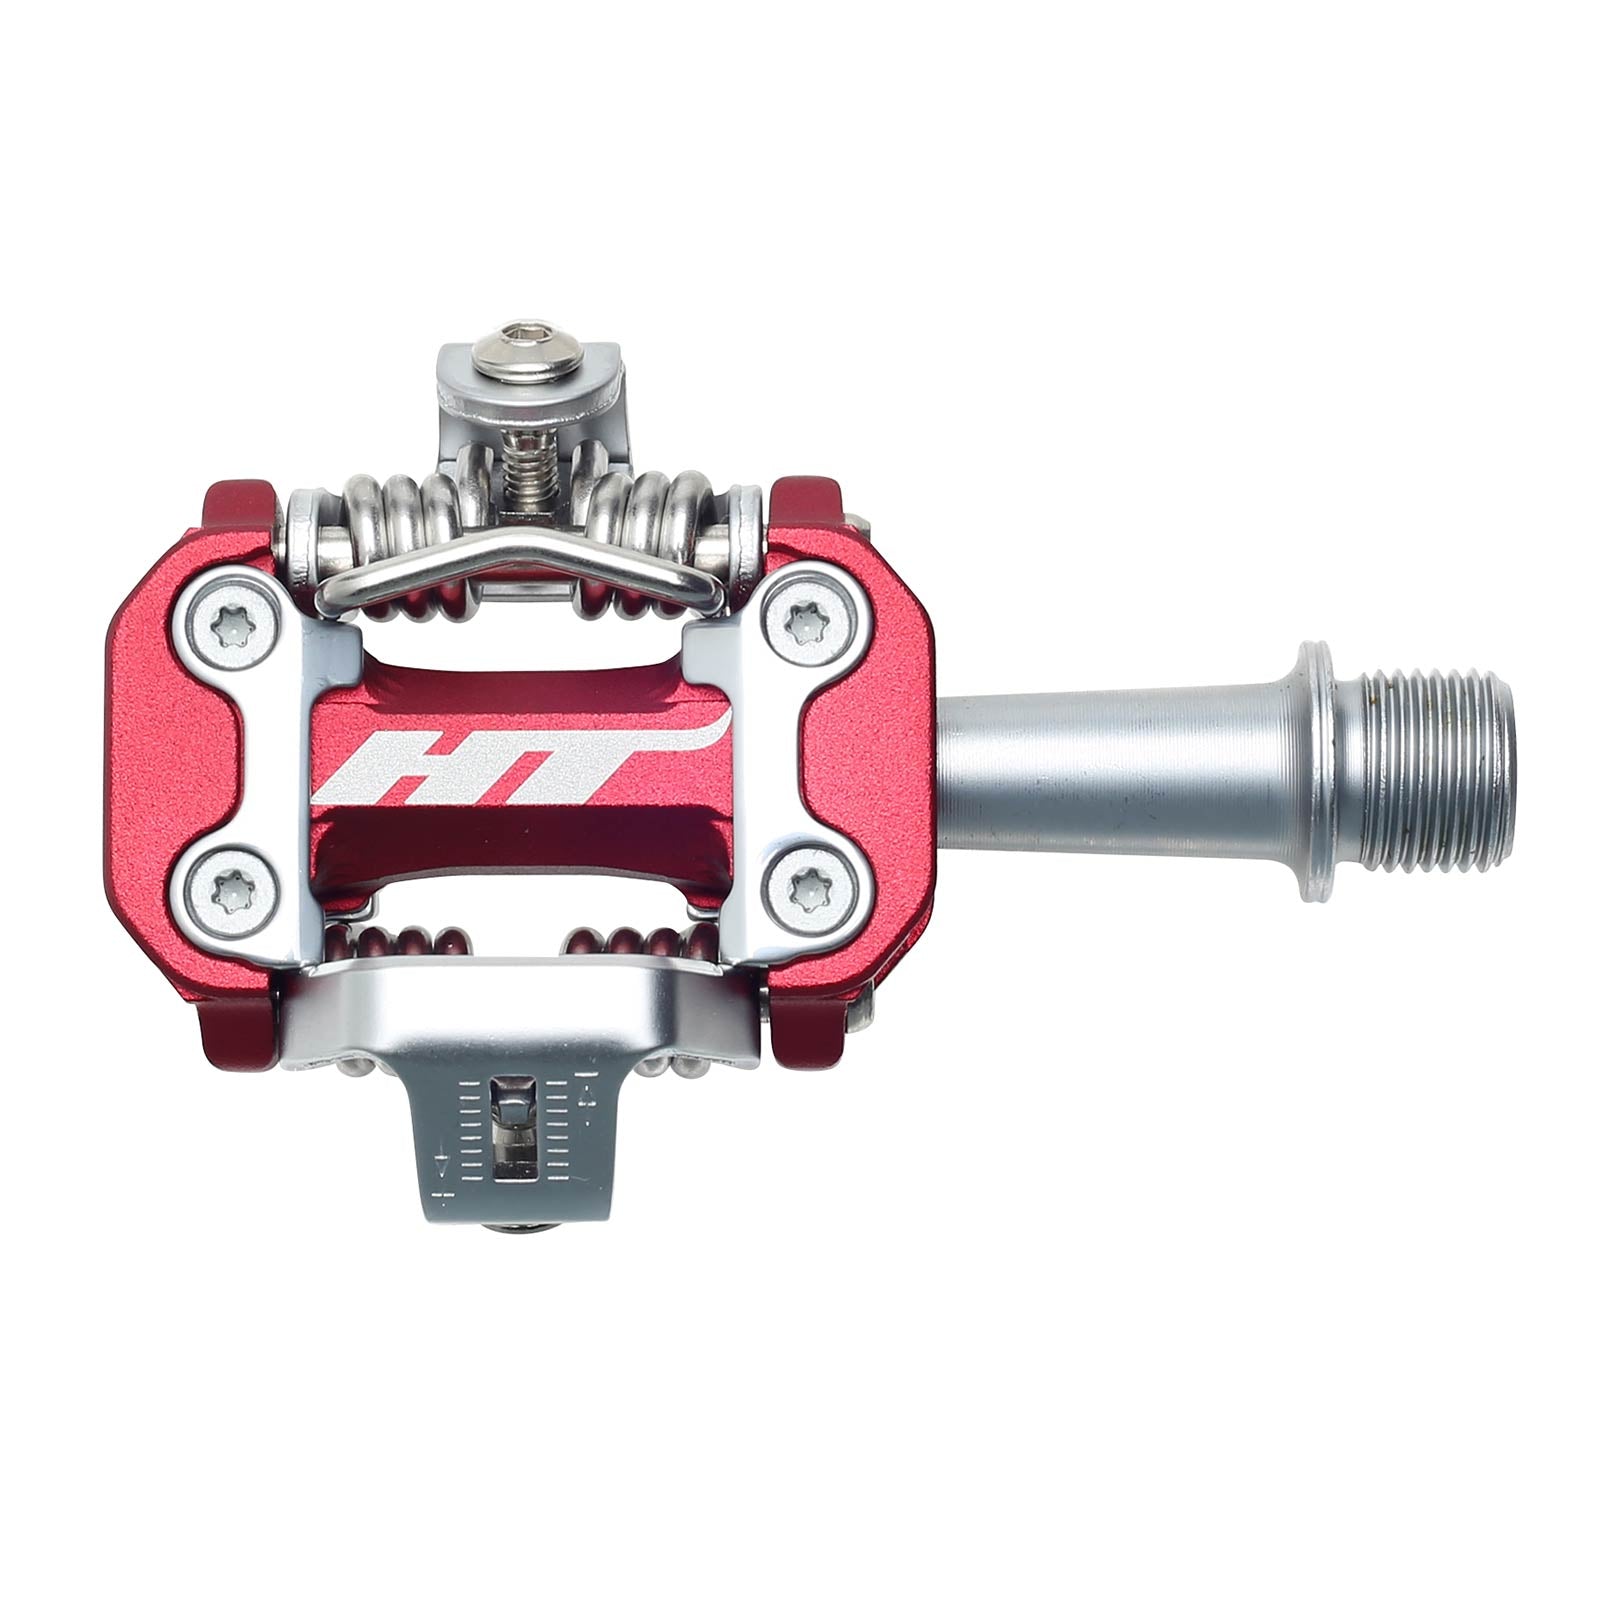 Ht M2 Pedals Alloy / CNC CRMO - Red